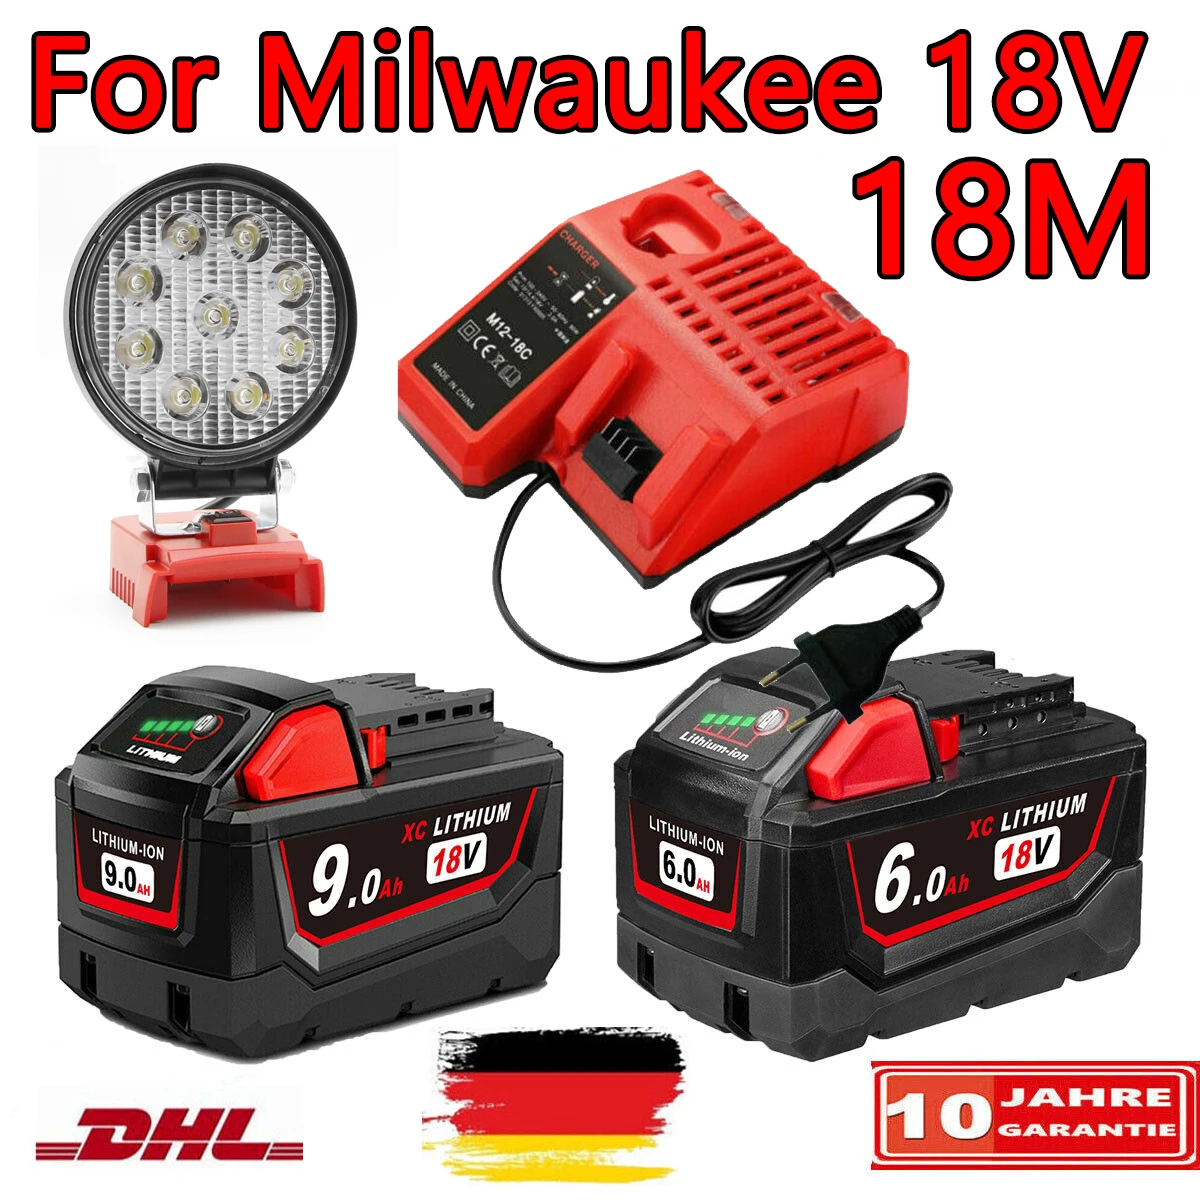 For Milwaukee 18V Battery For M18 M18B5 XC Lithium ION Battery 9.0/6.0Ah 48-11-1815 48-11-1850 2604-22 2604-20 2708-22 2607-22